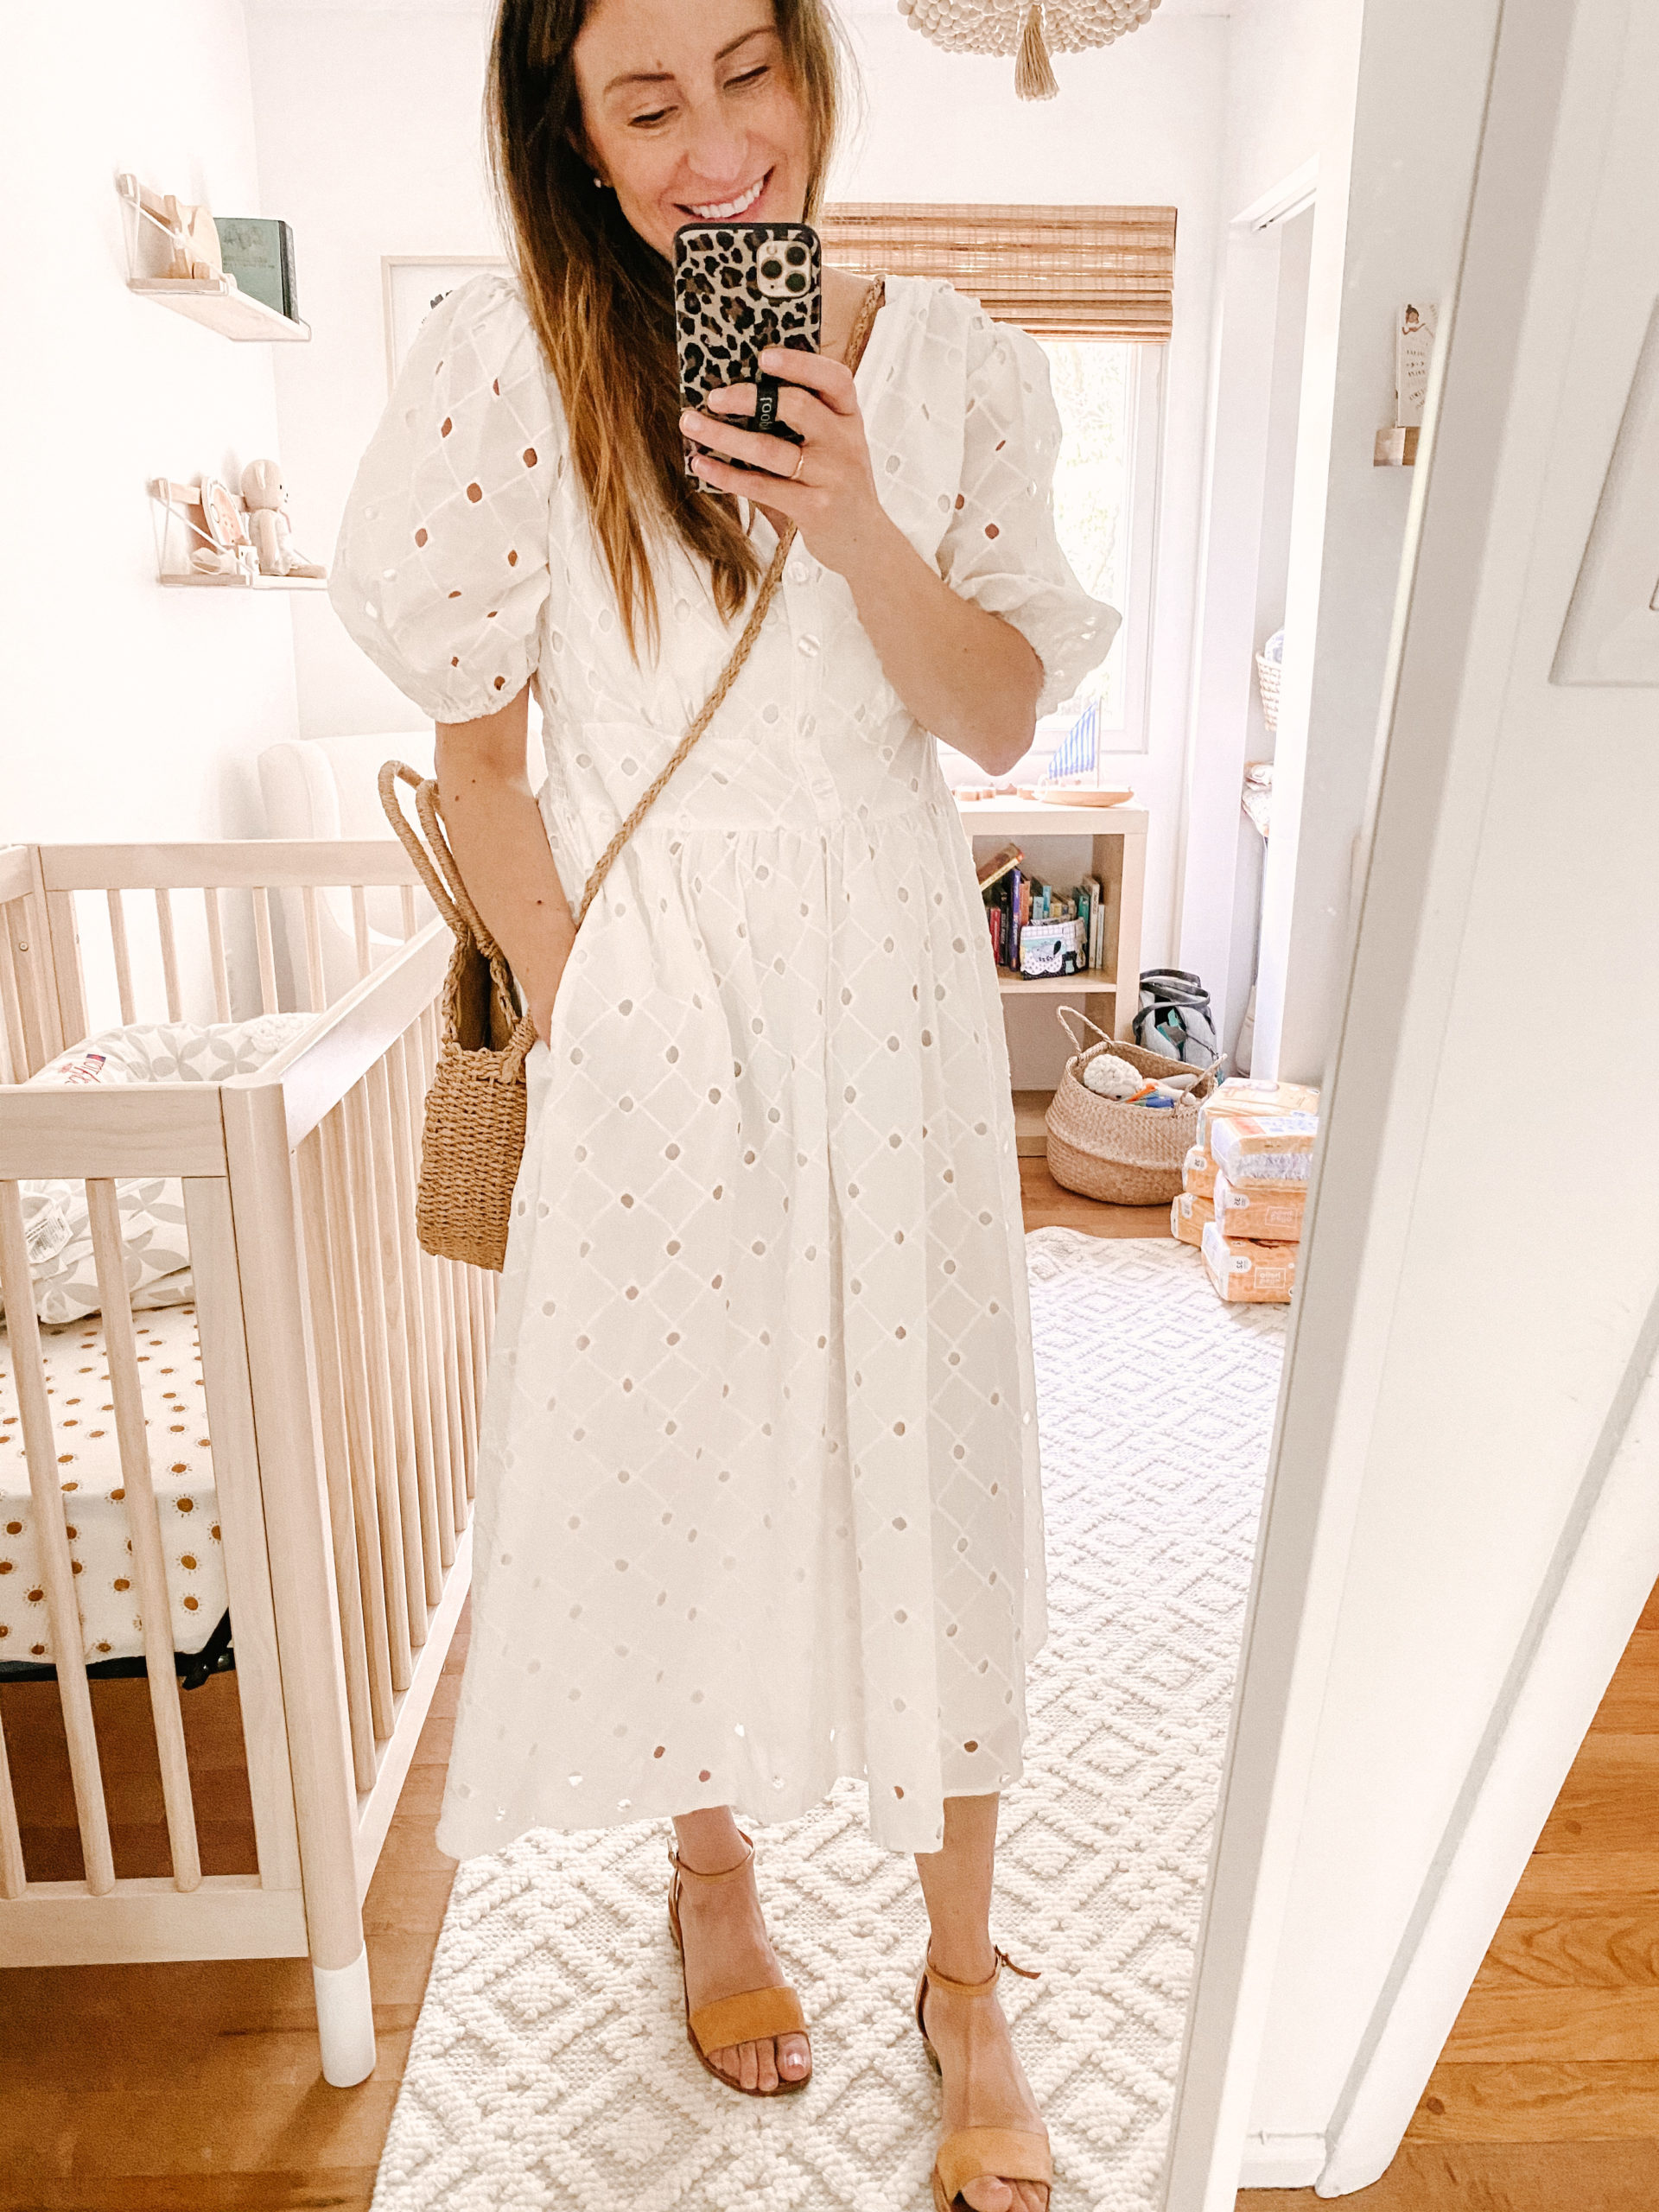 A Post-Partum Outfit For Summer